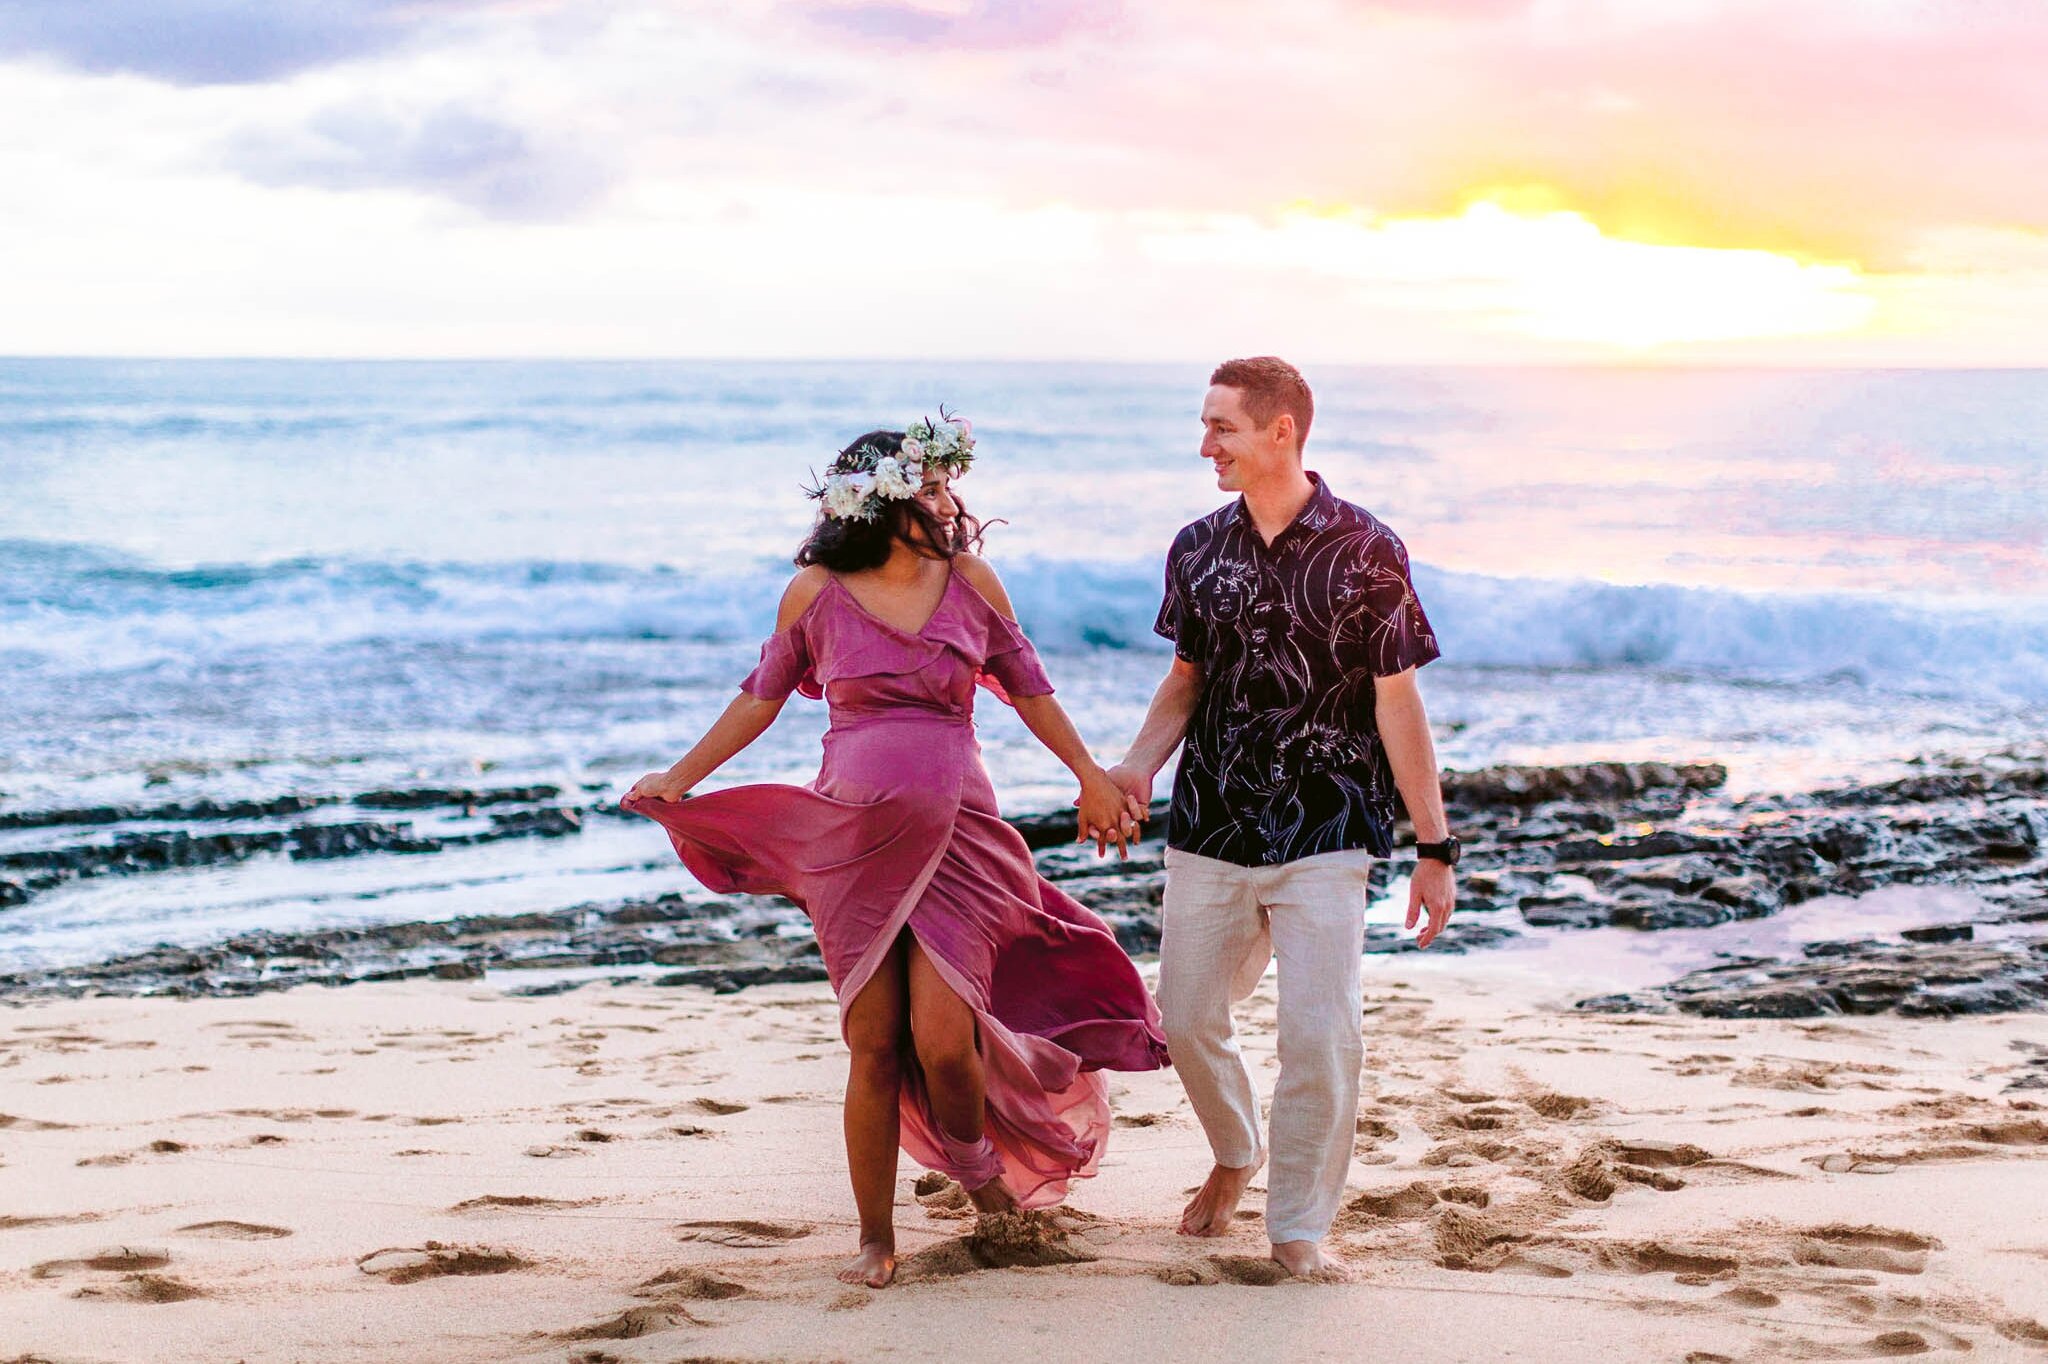 Ruth - Maternity Photography Session at Maili Beach Park, West side oahu - hawaii family photographer 19.jpg